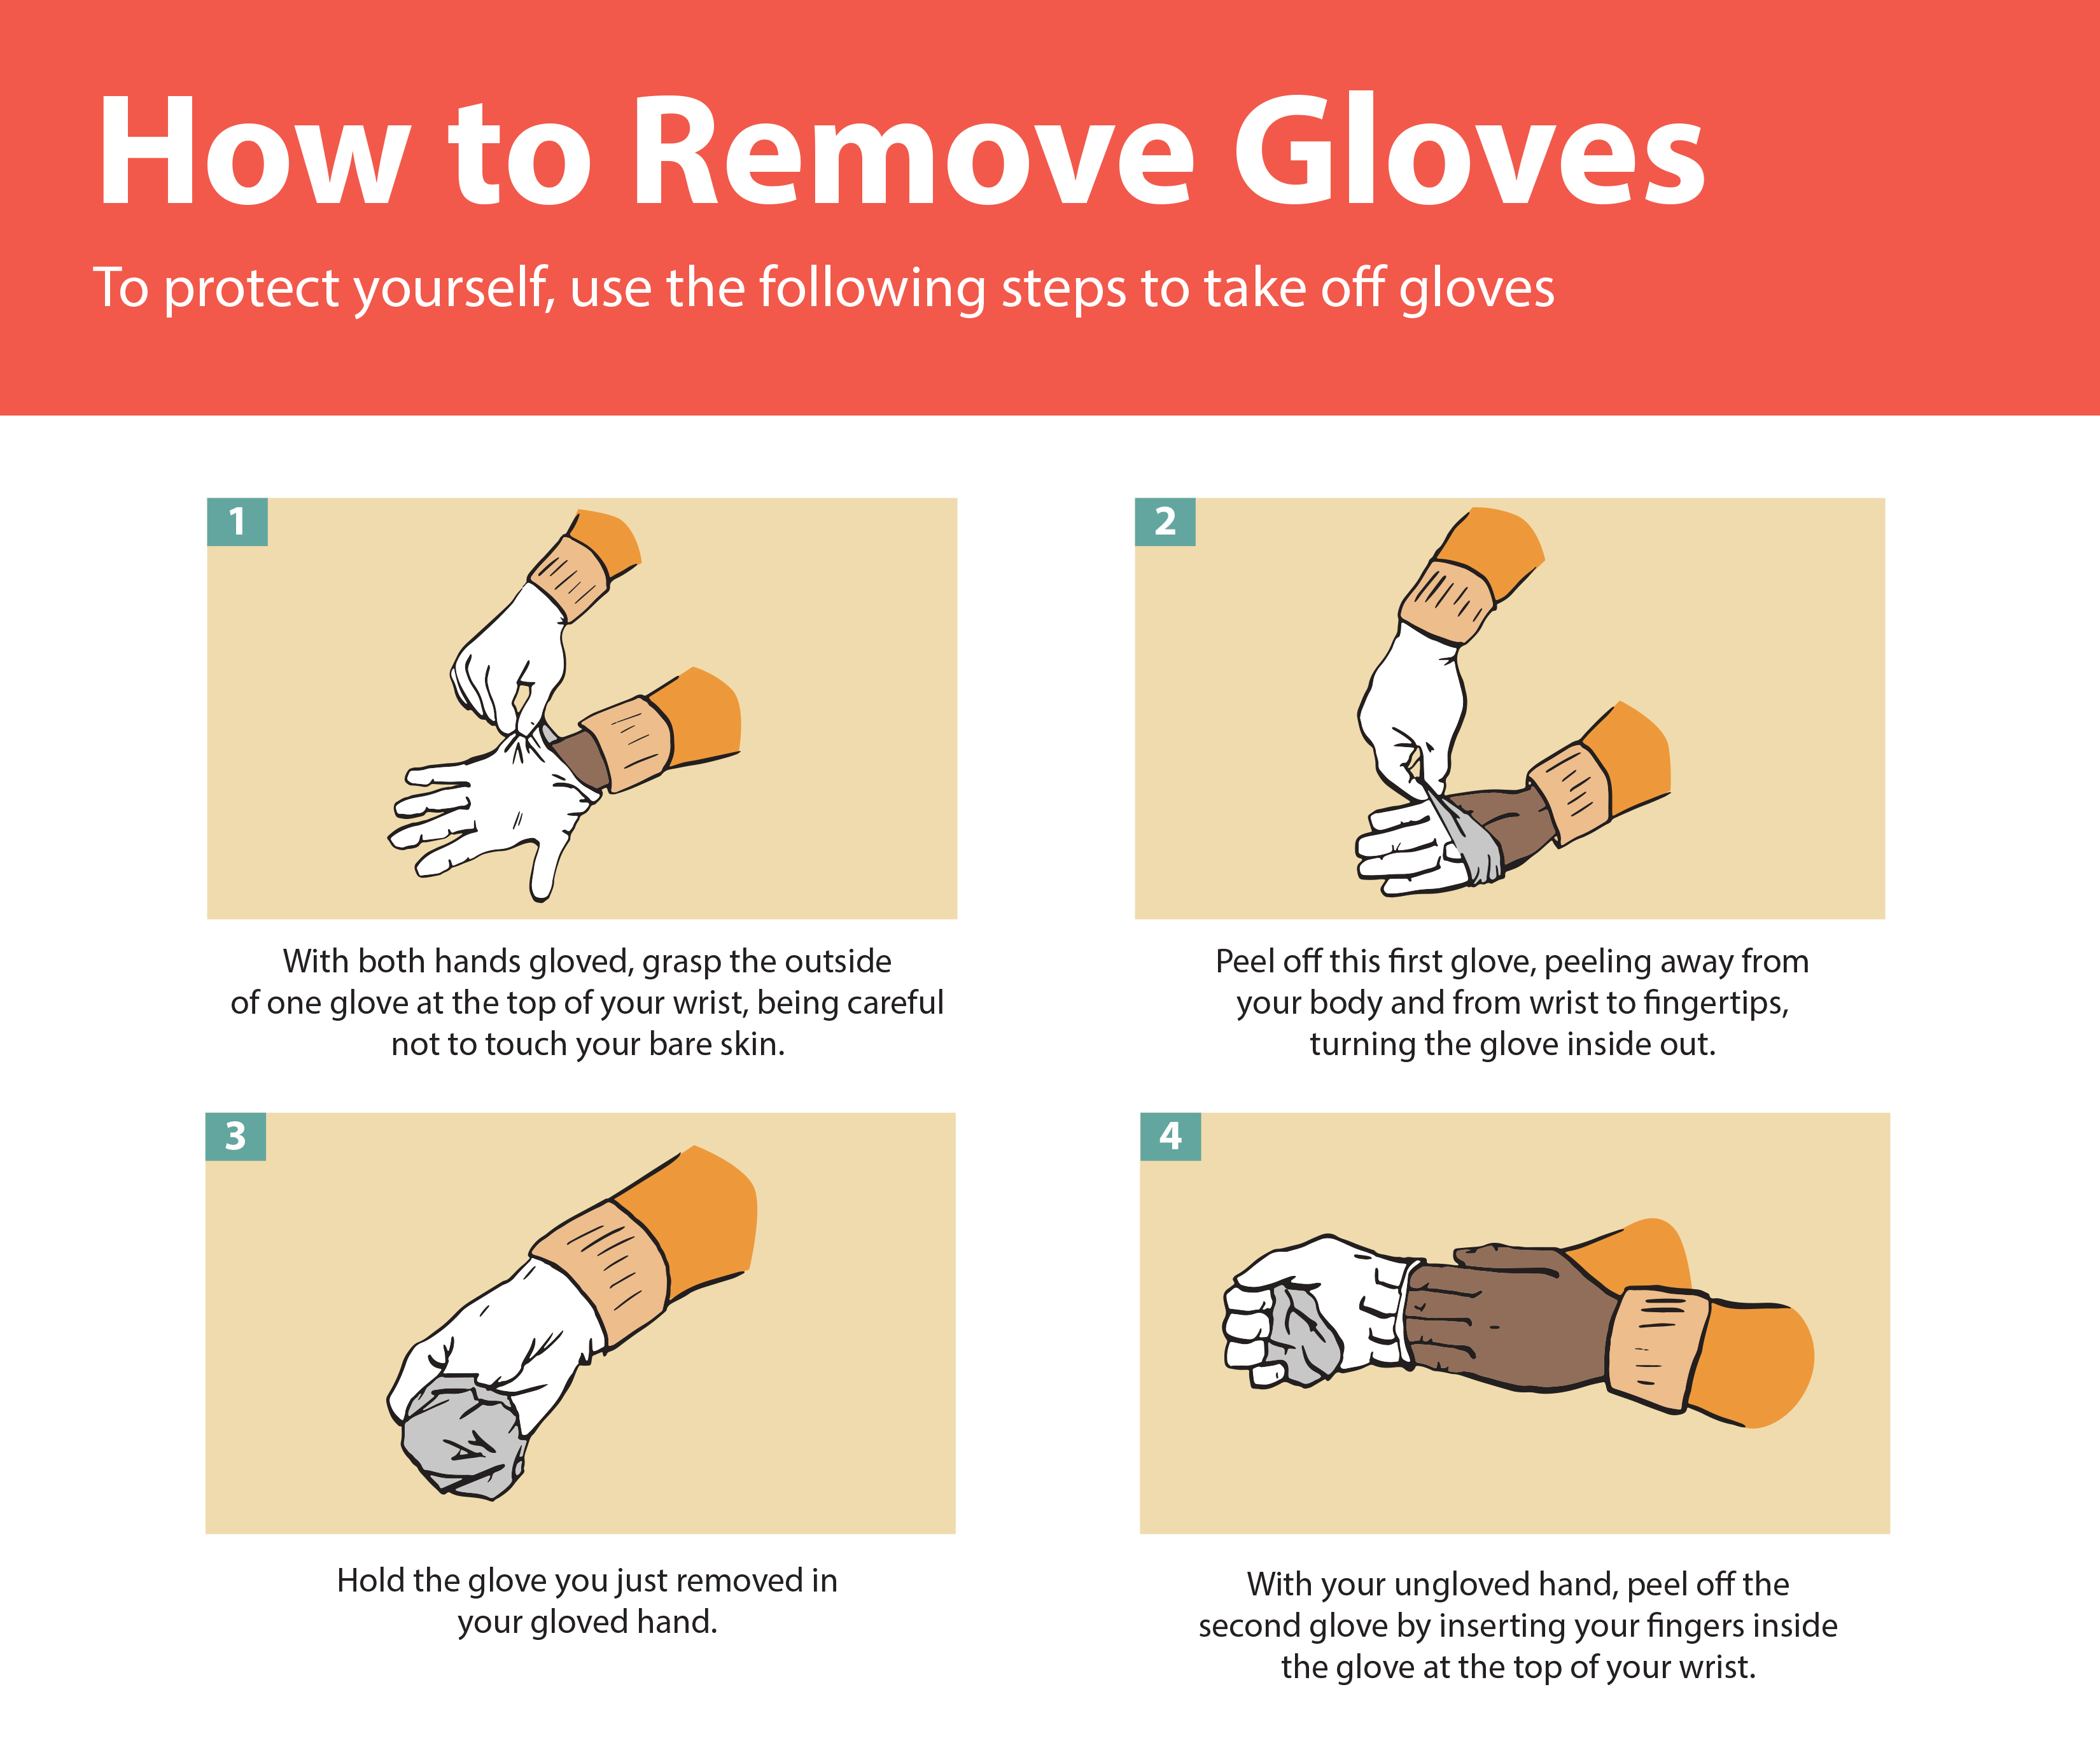 How to Safely Remove Gloves When Working with Patients with an Infectious Disease